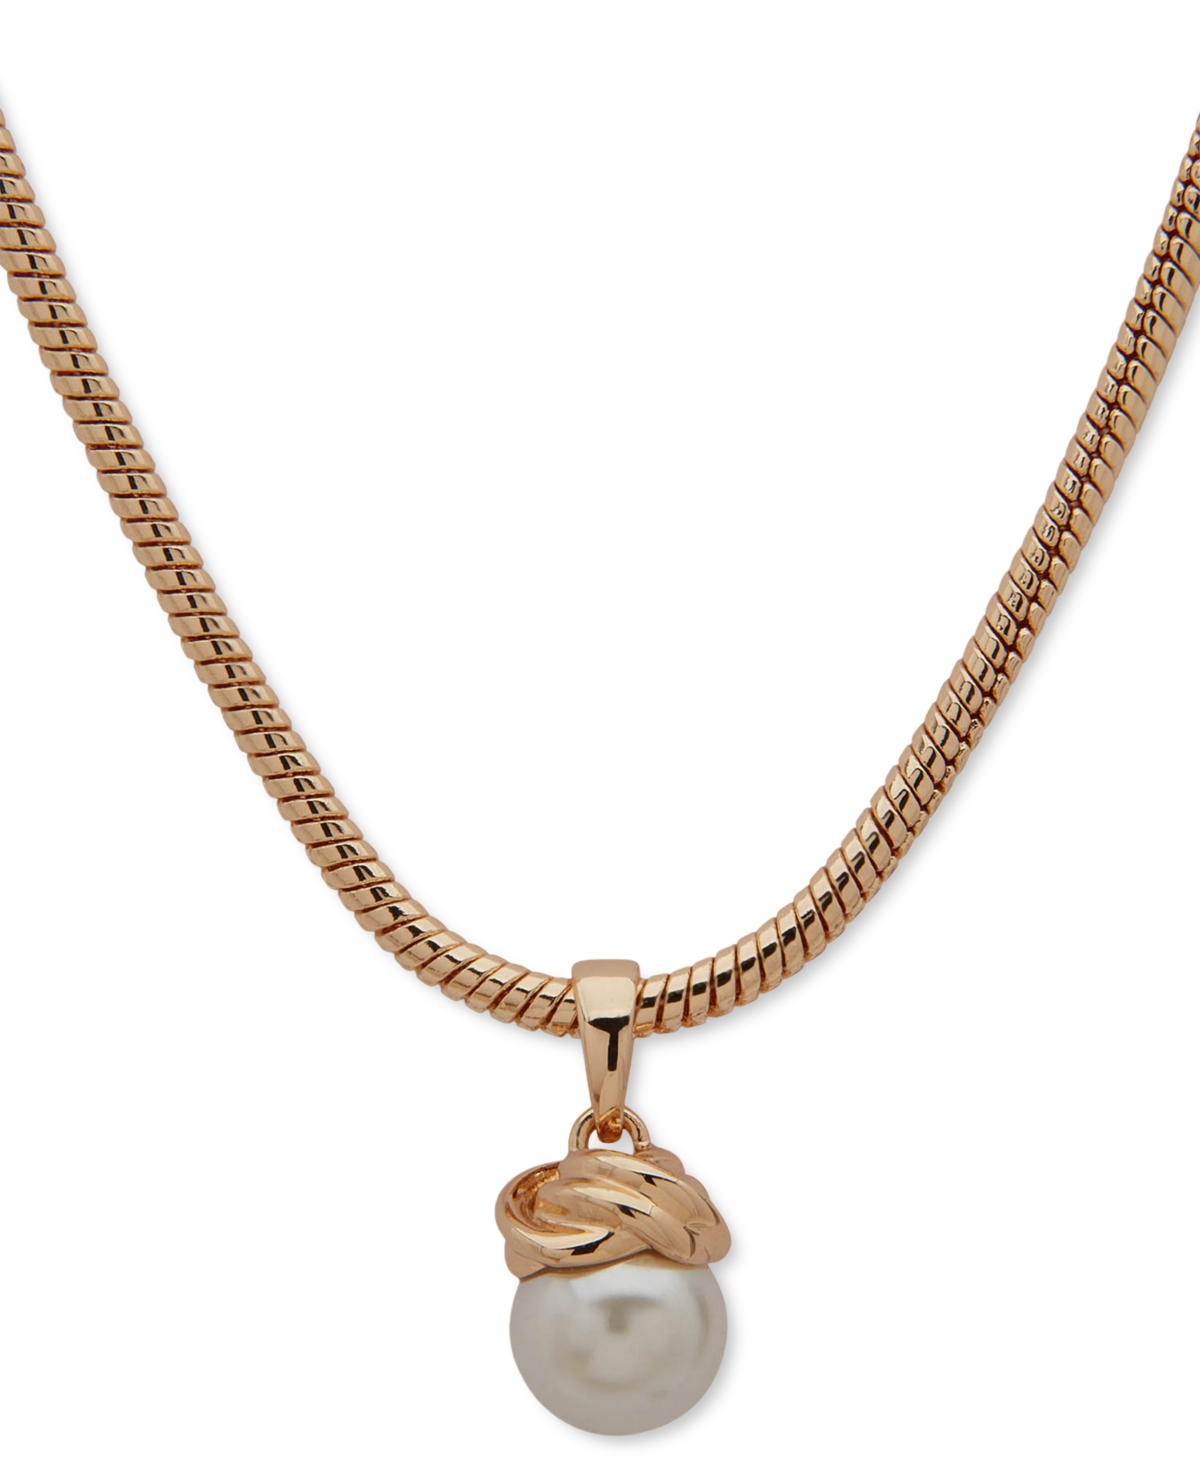 Anne Klein Gold-tone Imitation Pearl Knot Pendant Necklace, 16" + 3" Extender In Crystal